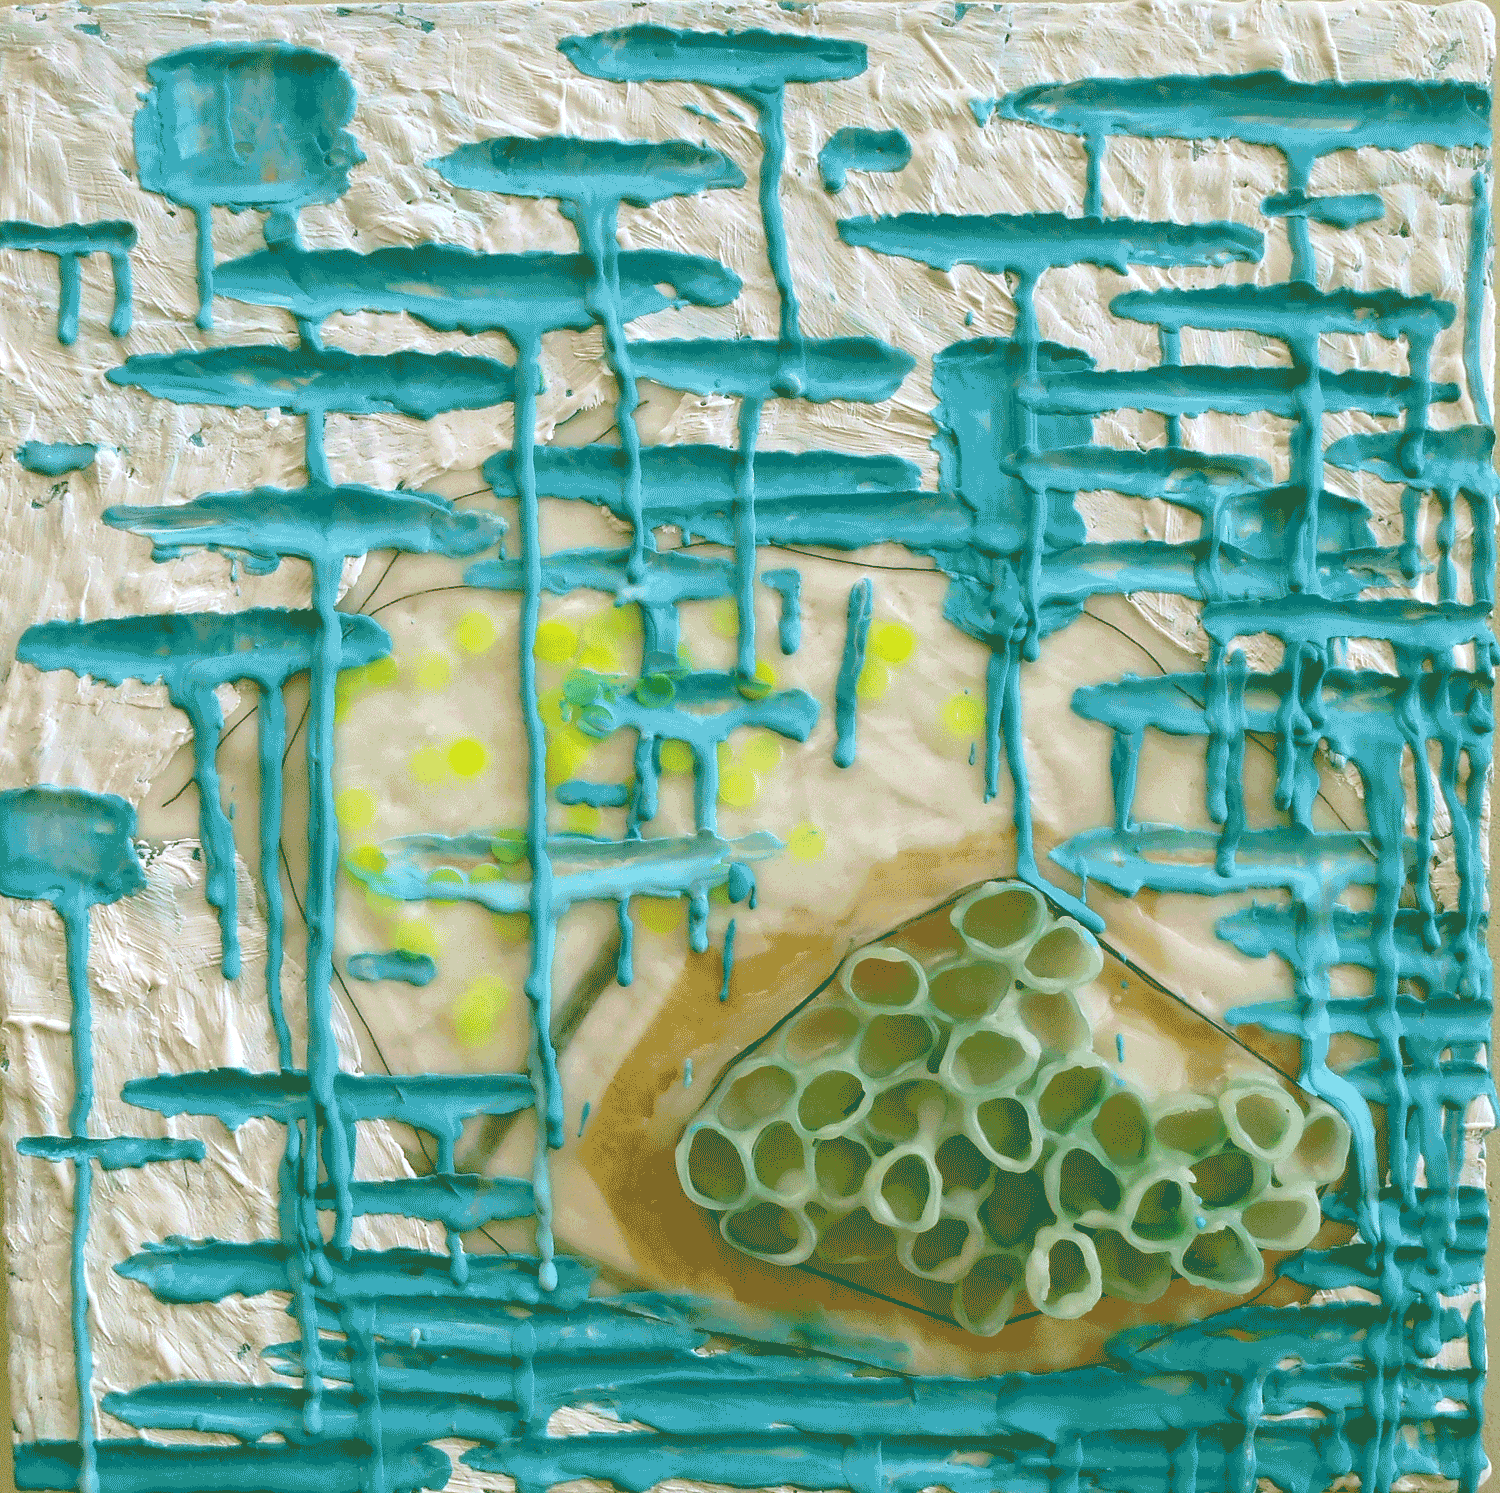   ​The Pain is Gentle 2.0   2012 | encaustic, sequins, thread and found objects on panel | 10 x 10 |​ $375 